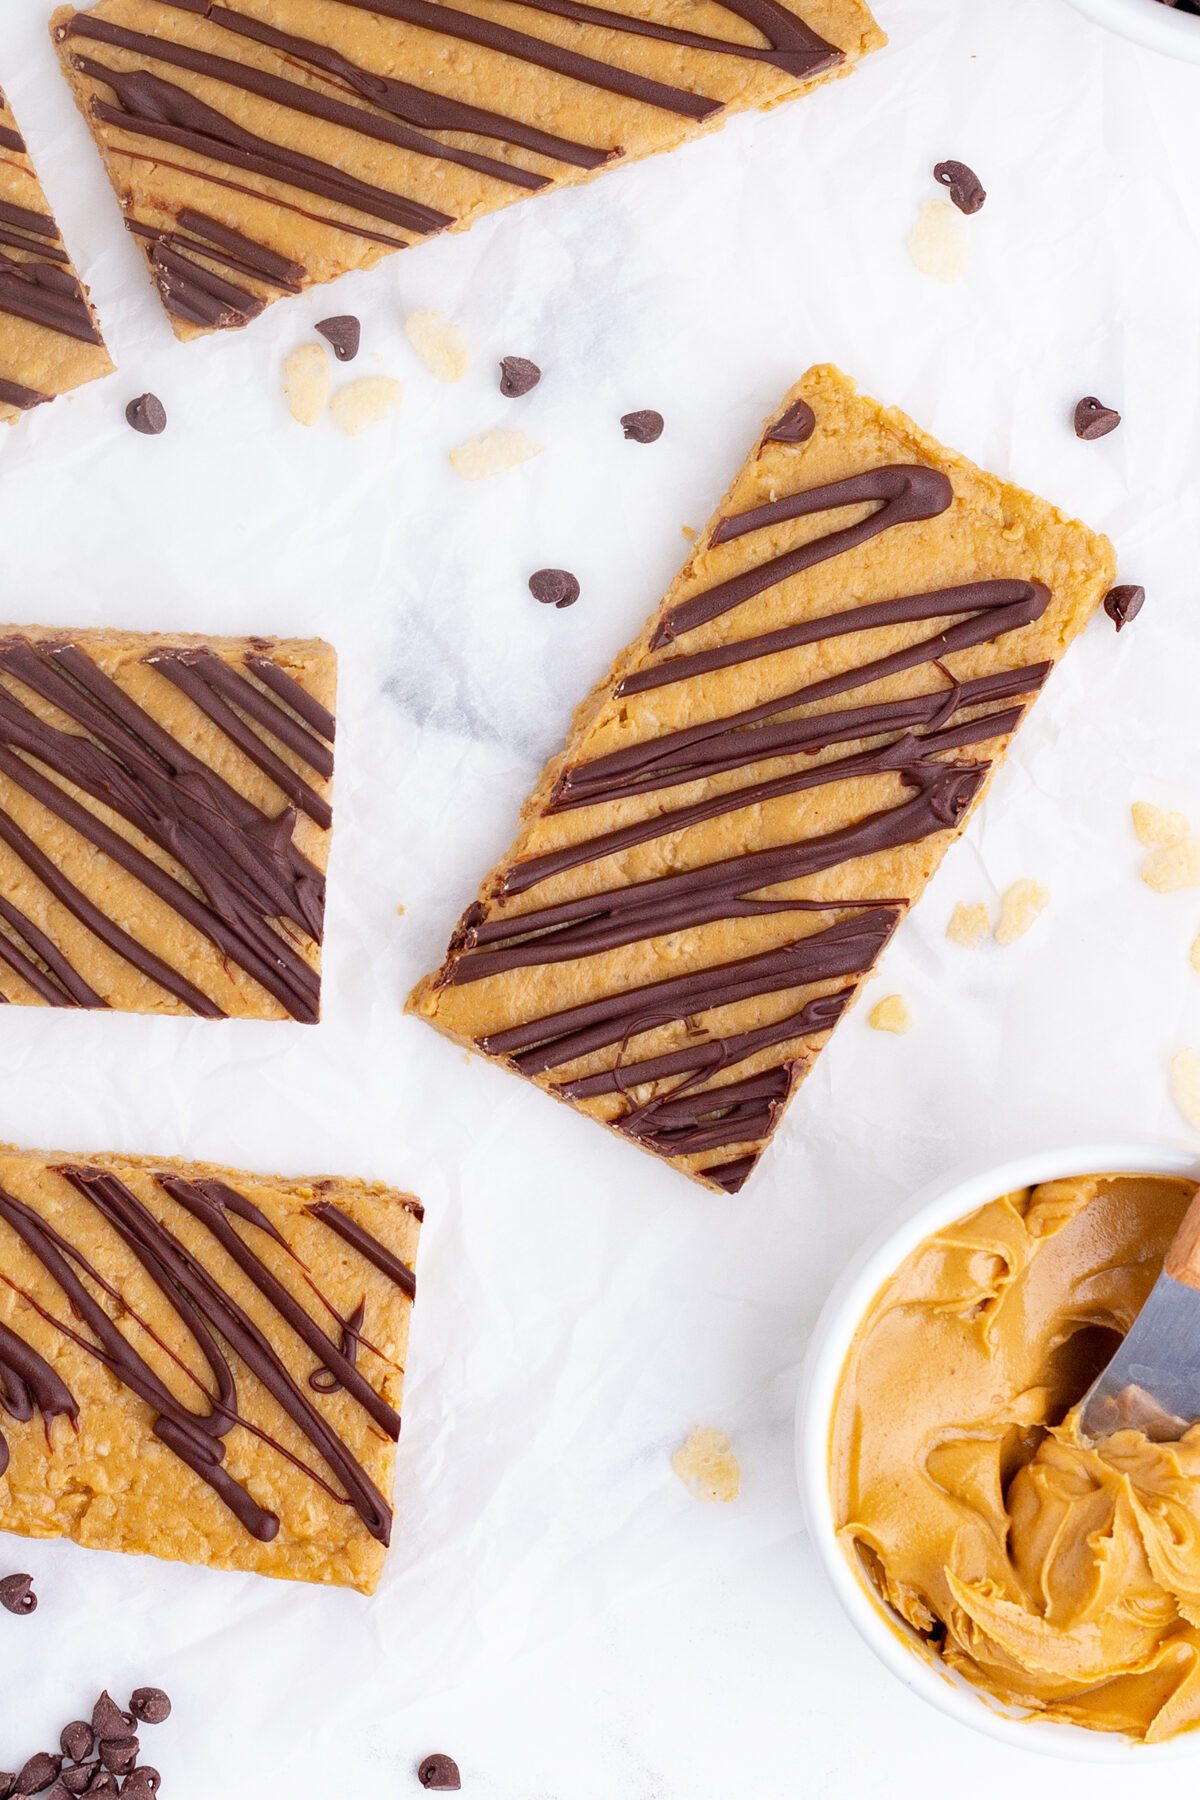 homemade protein bars drizzled with chocolate